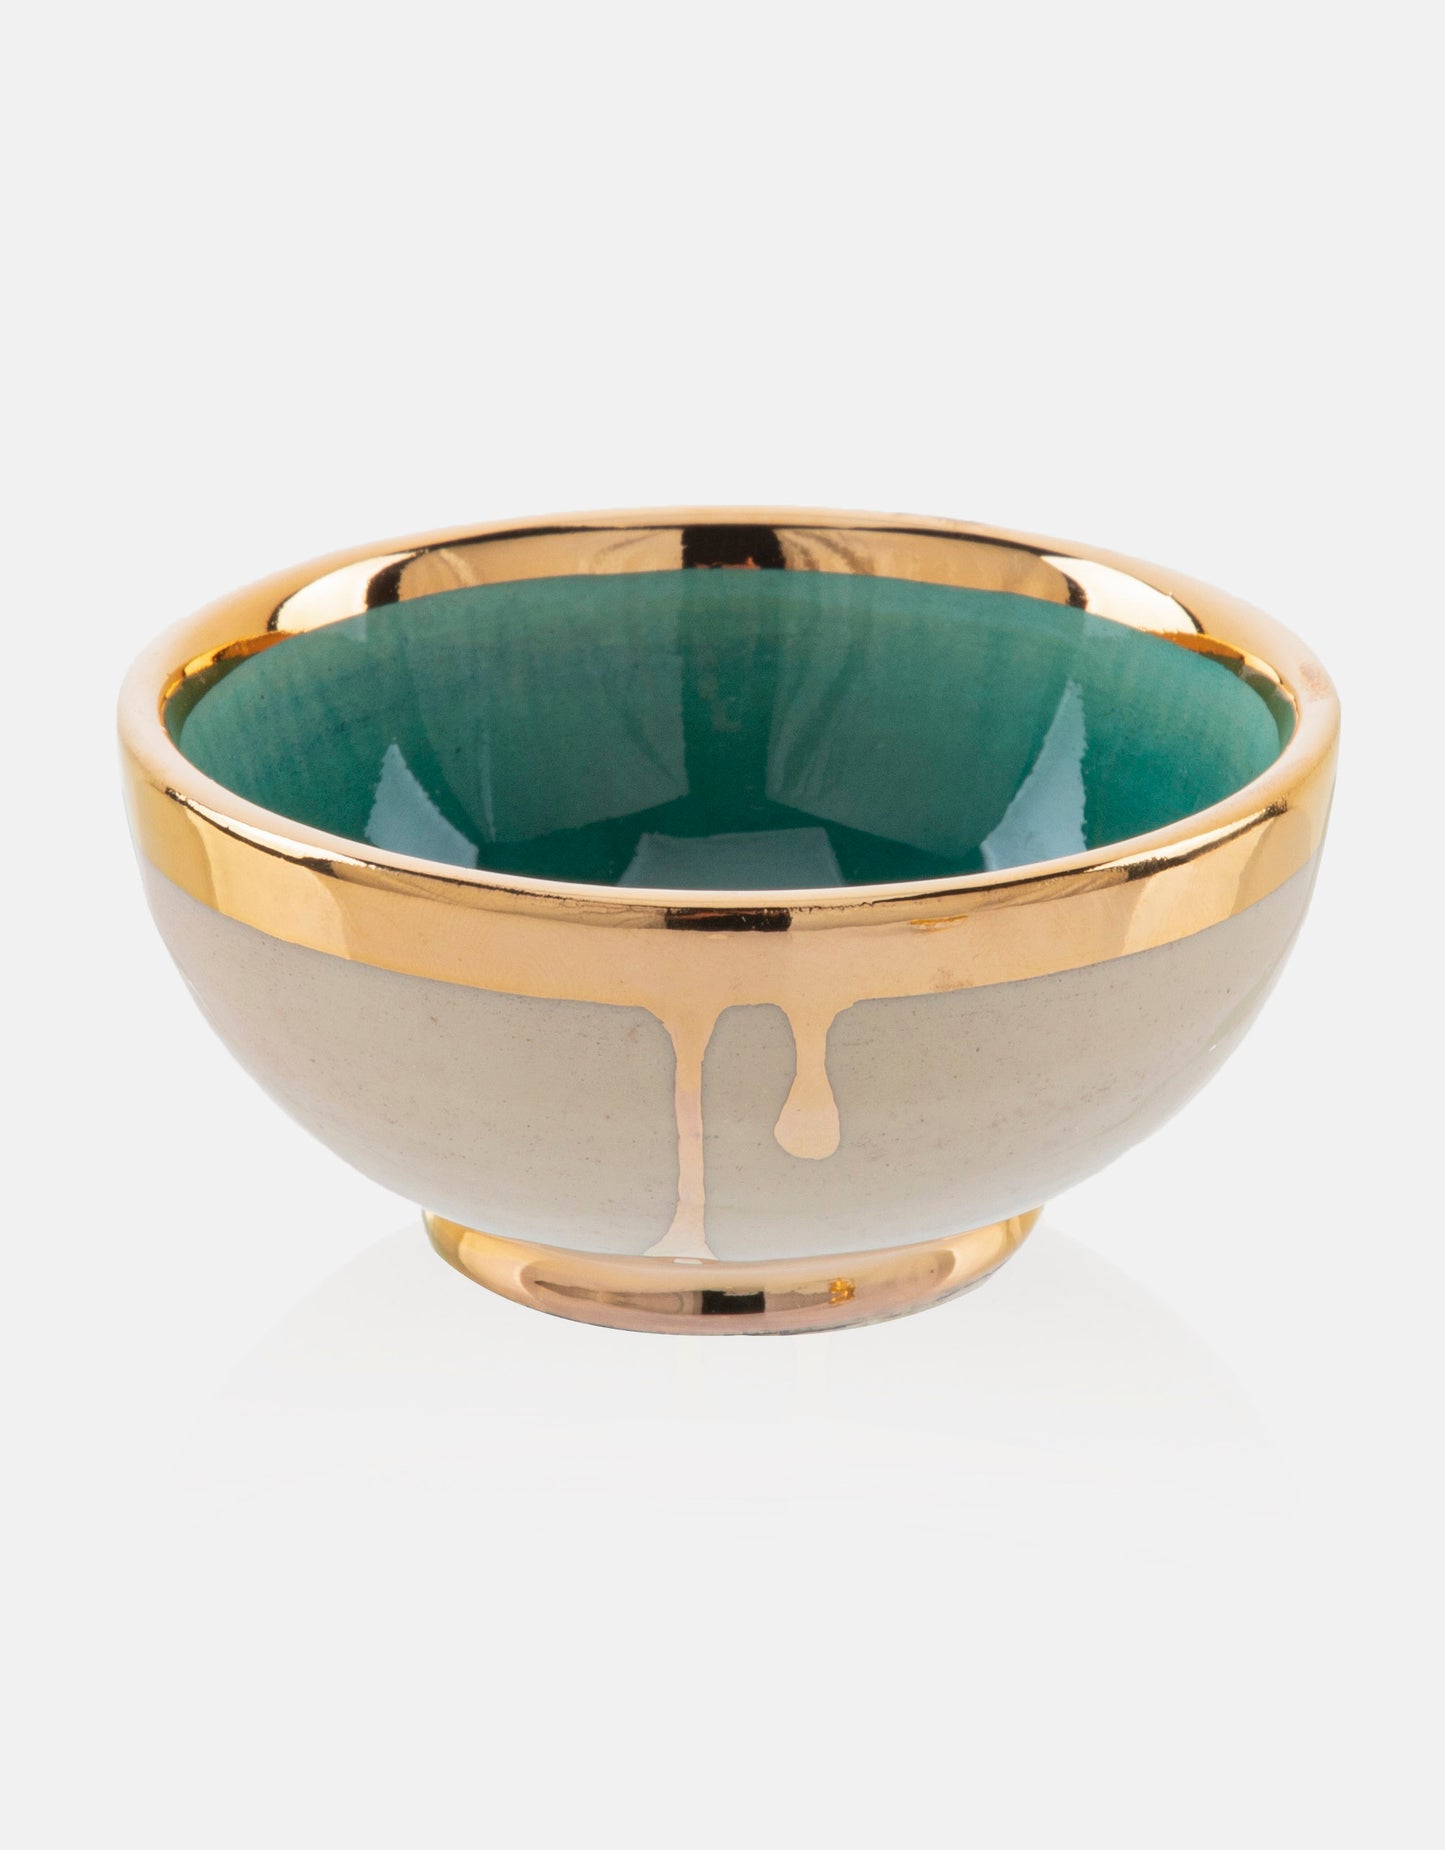 DECORATIVE Round Ceramic Bowl Handcrafted in 11Kt Gold